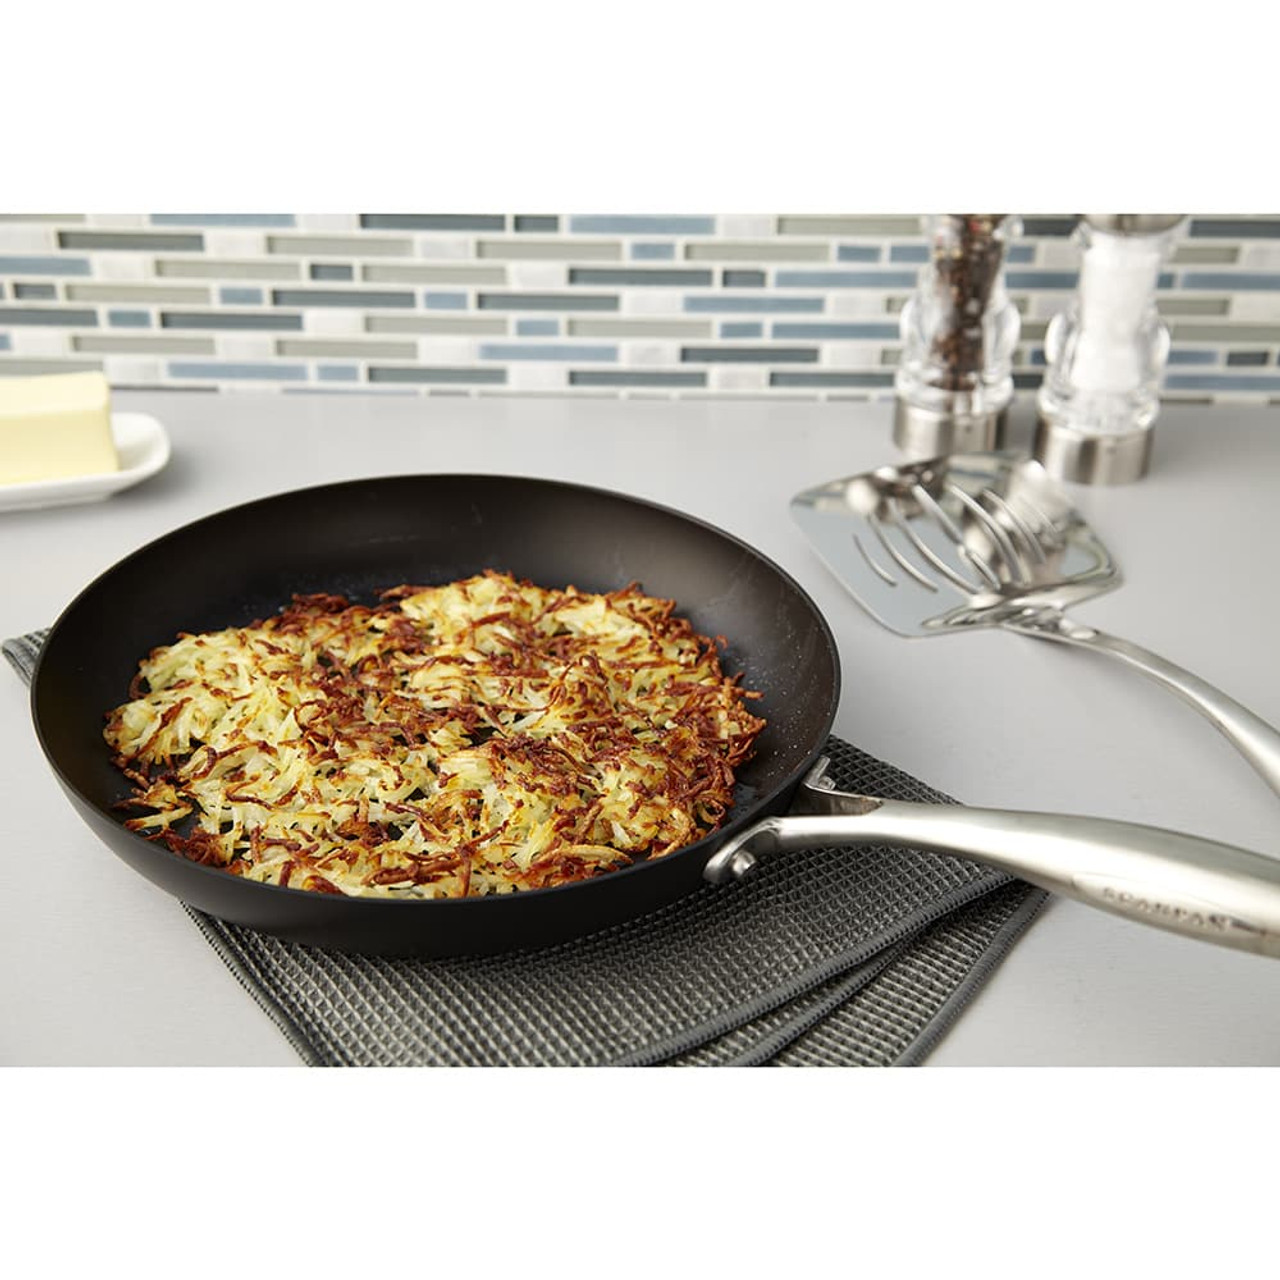 https://cdn11.bigcommerce.com/s-hccytny0od/images/stencil/1280x1280/products/2846/10045/scanpan-professional-fry-pan-1__18094.1590683690.jpg?c=2?imbypass=on